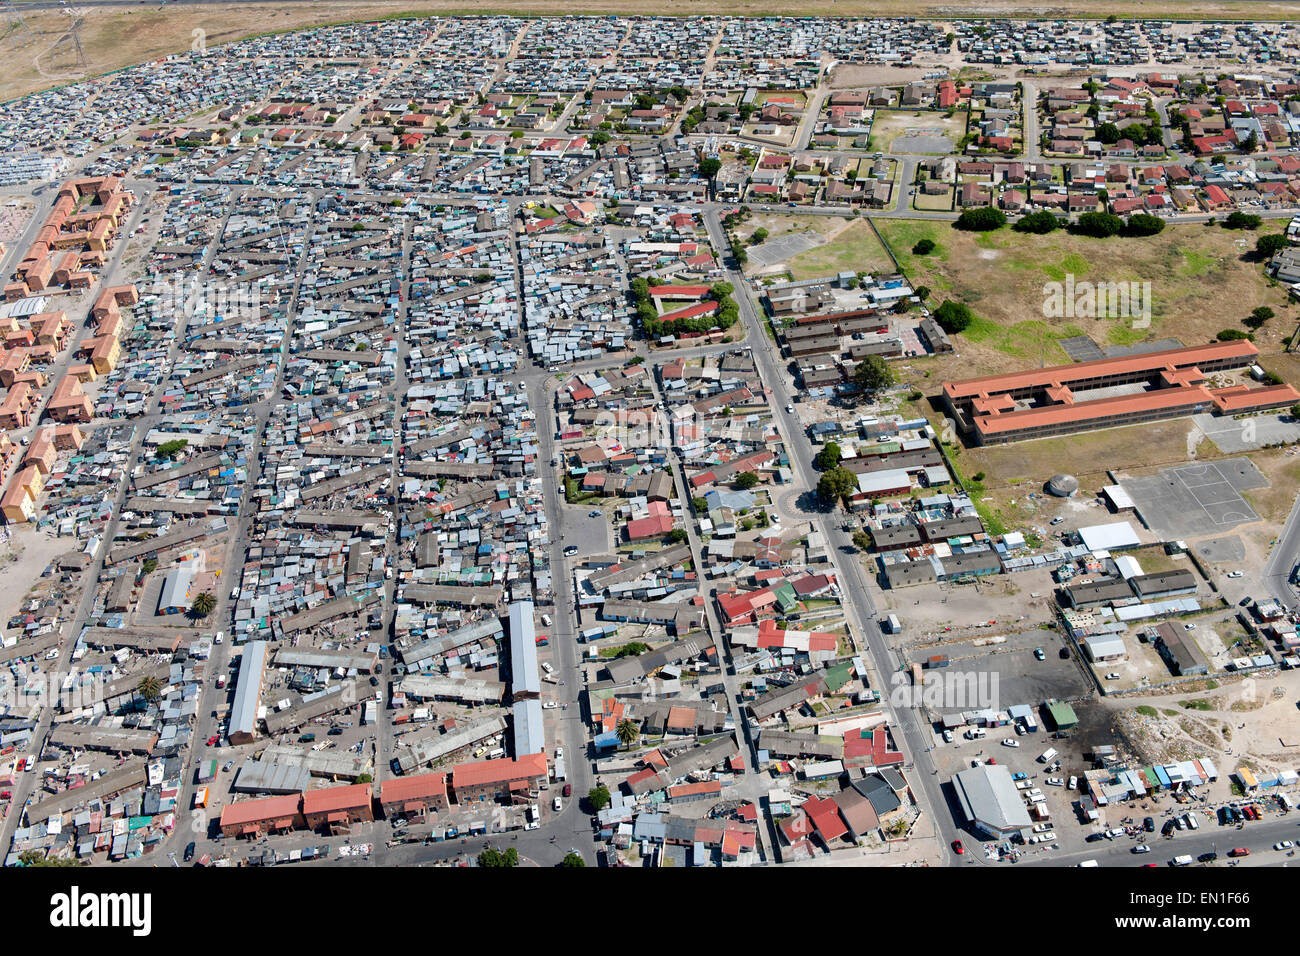 Aerial view of housing and the township suburb of Langa in the Cape Flats  region of Cape Town, South Africa Stock Photo - Alamy